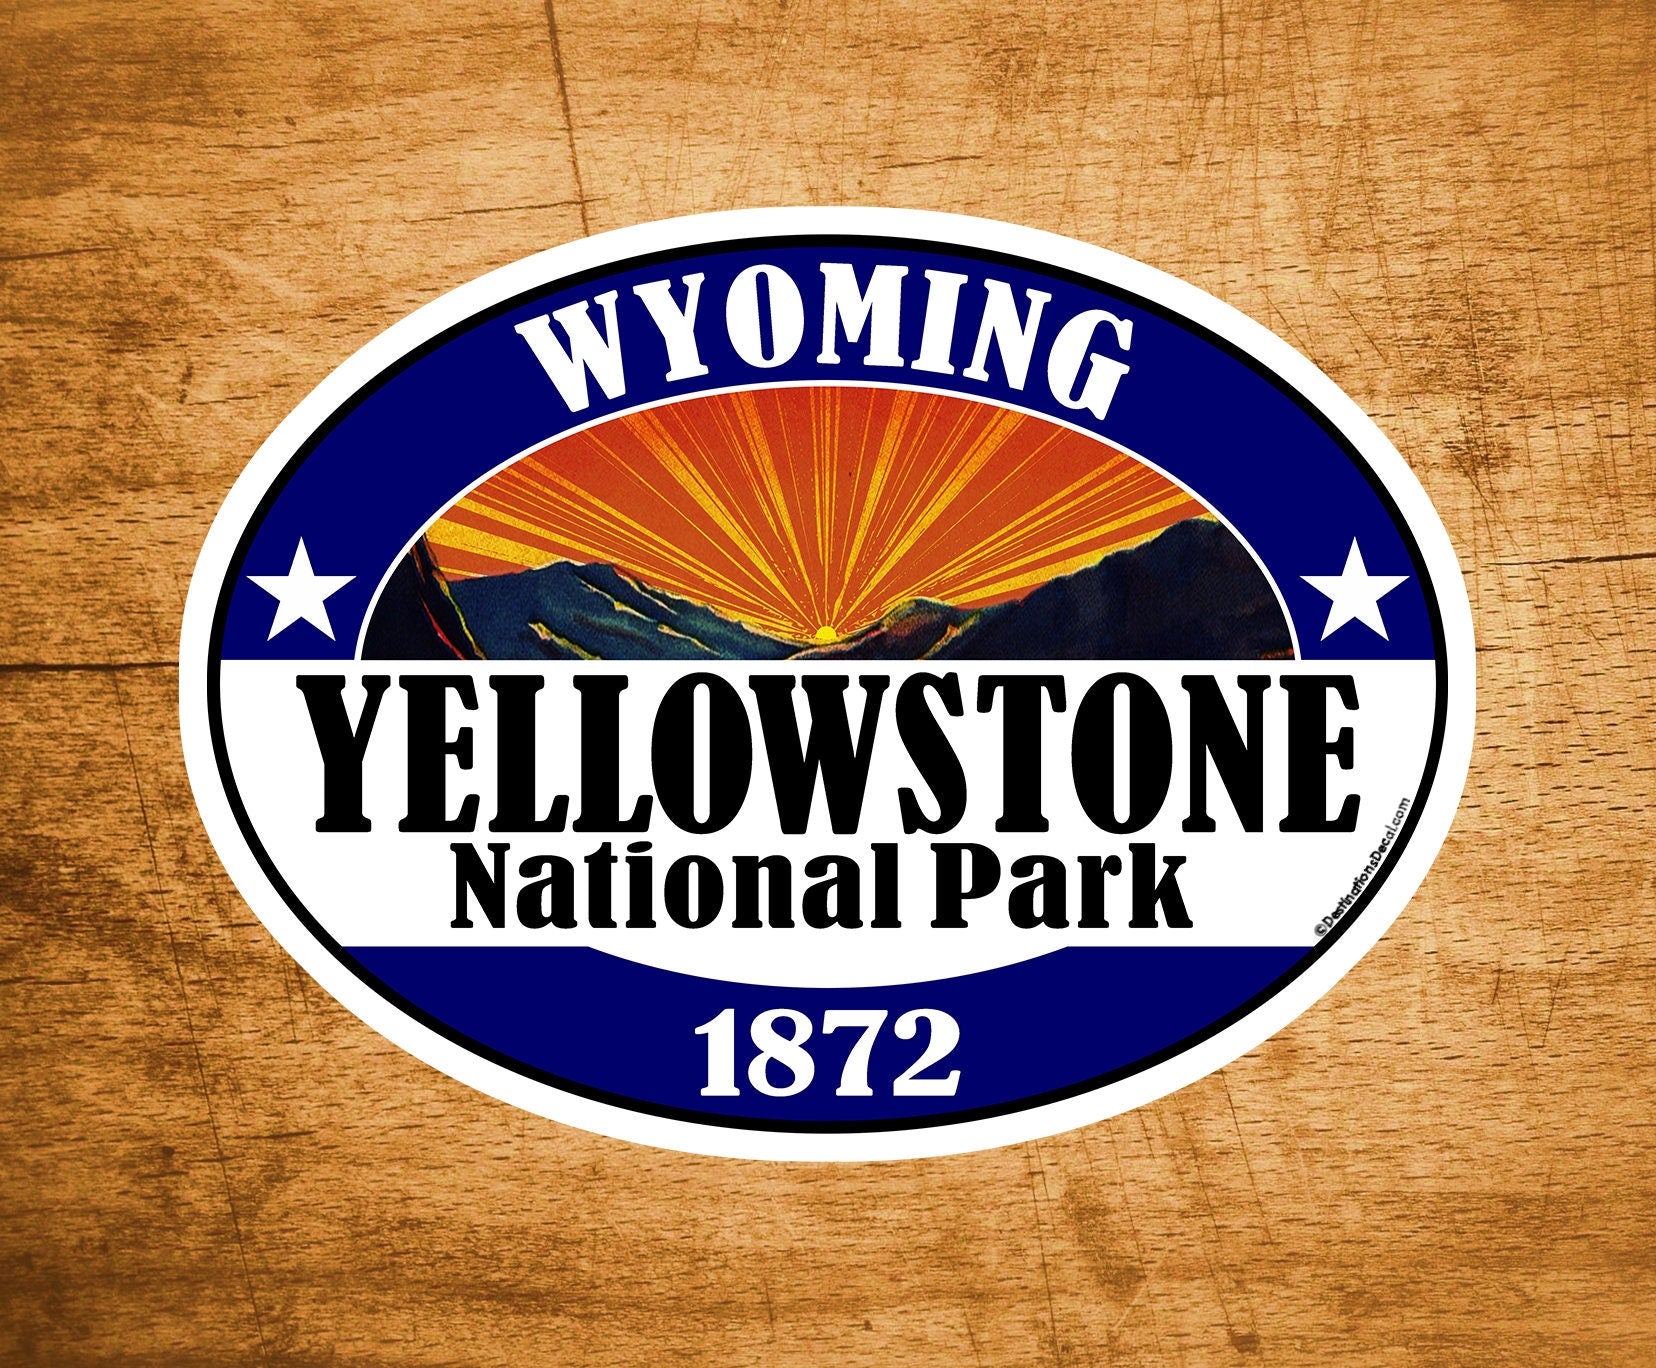 Yellowstone National Park Wyoming 4" x 2.9" Decal Sticker